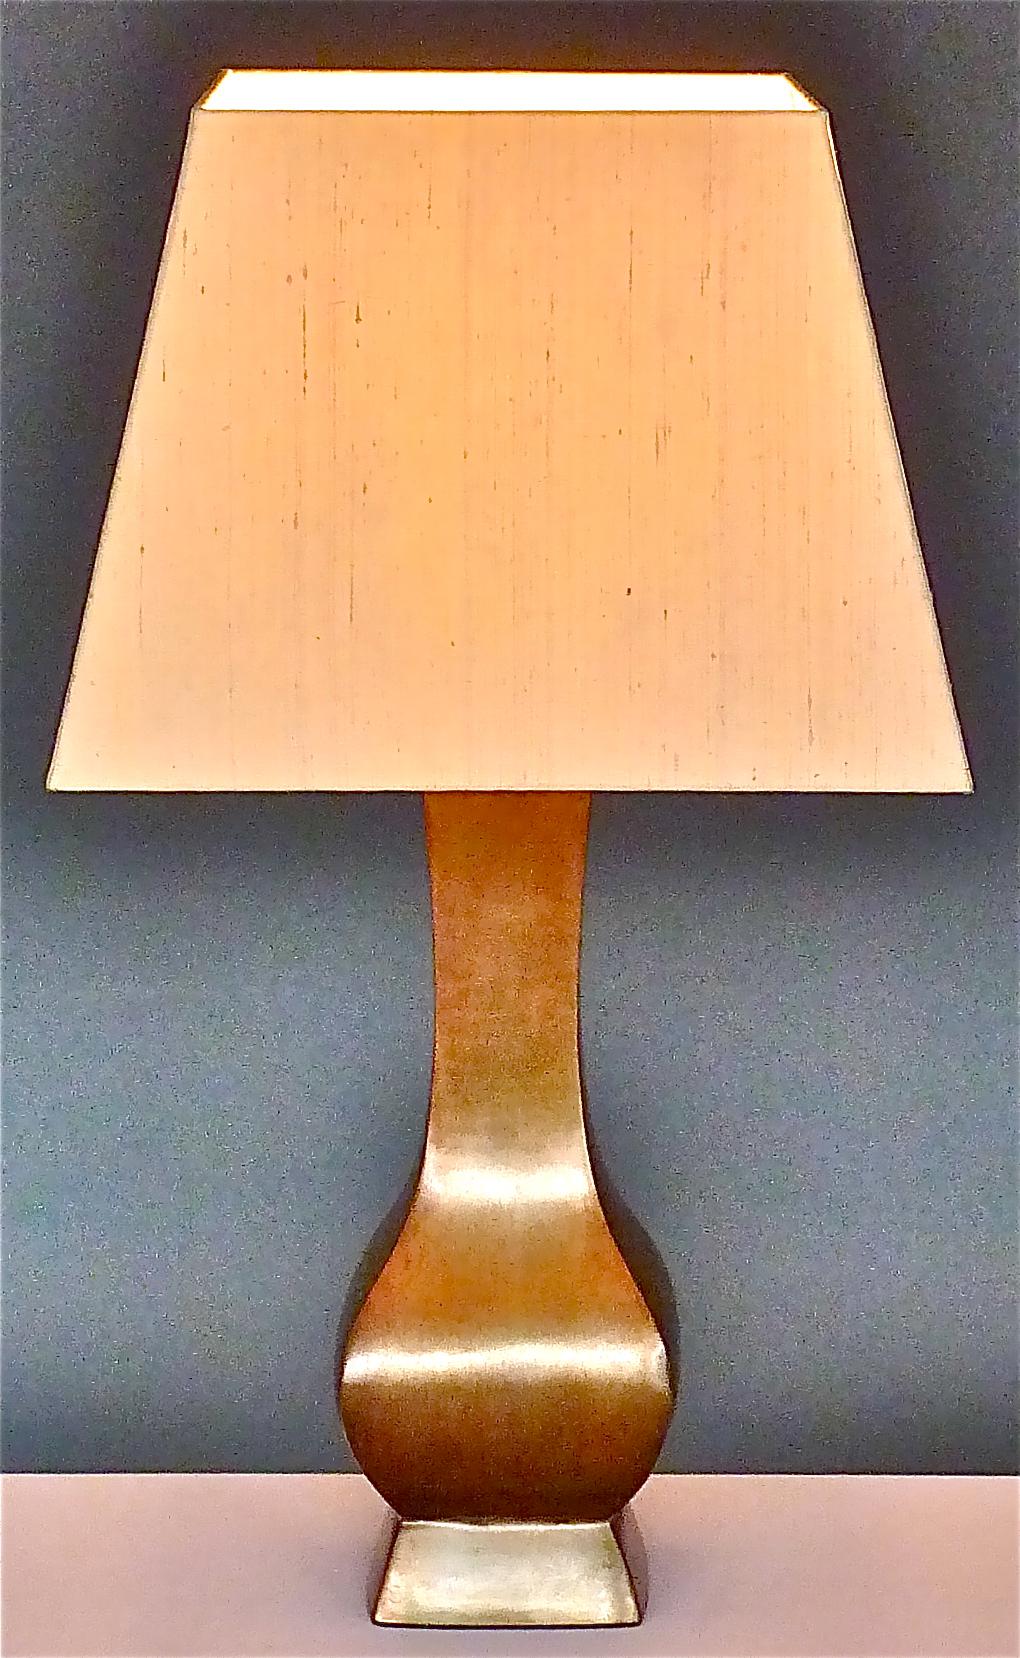 Huge Patinated Bronze Table Lamp Pergay Crespi Maison Jansen Style France 1970s For Sale 5